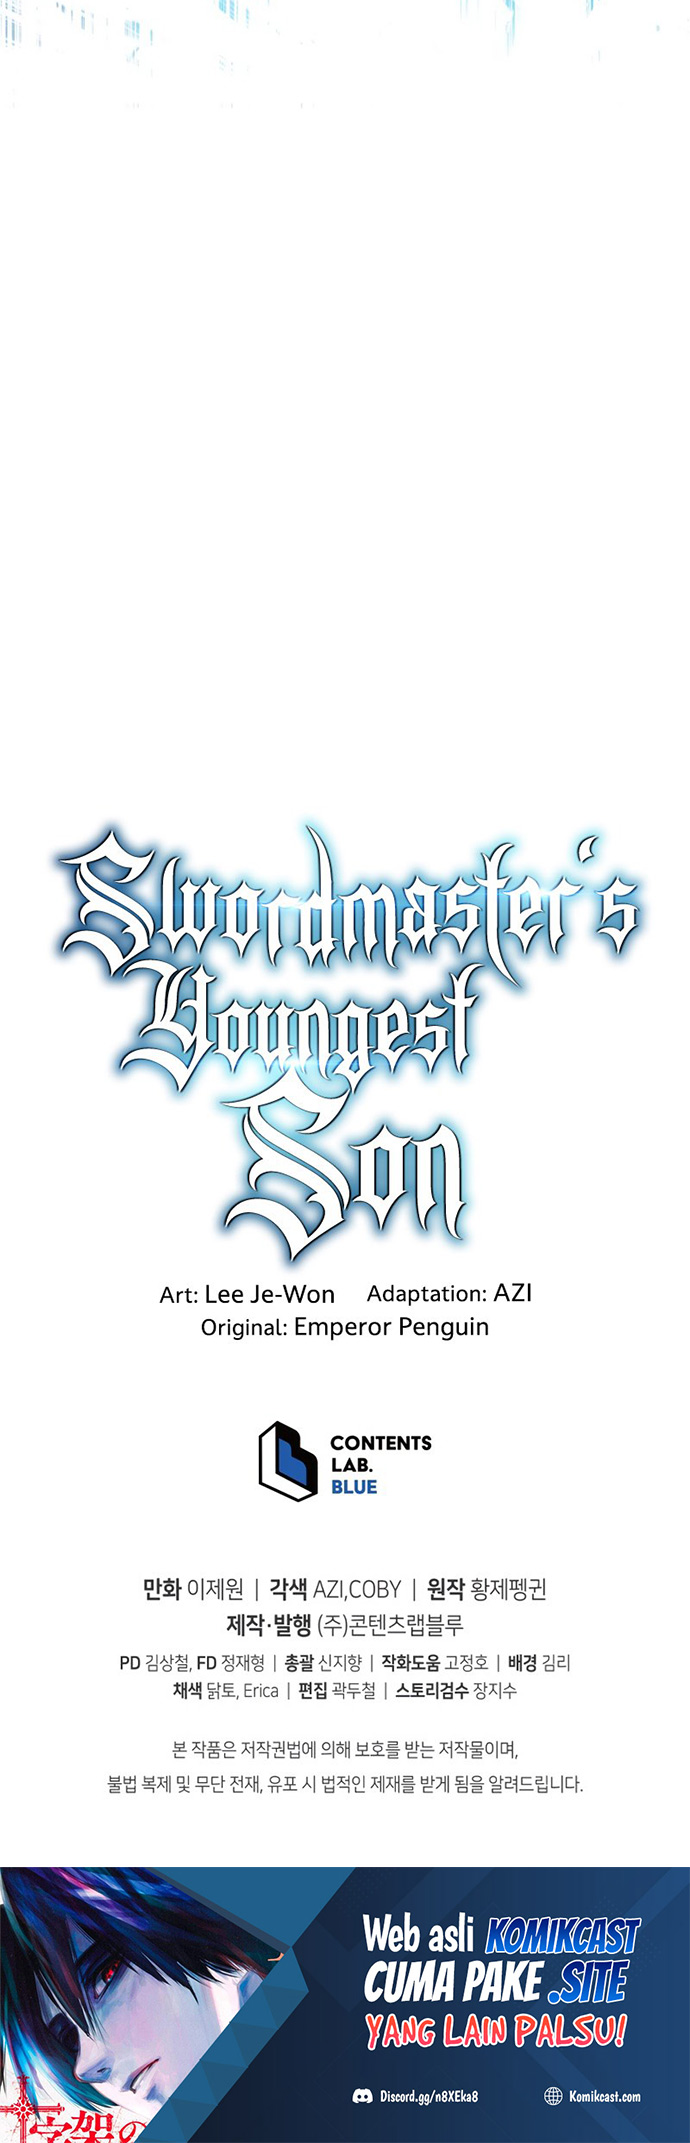 Swordmaster’s Youngest Son Chapter 53